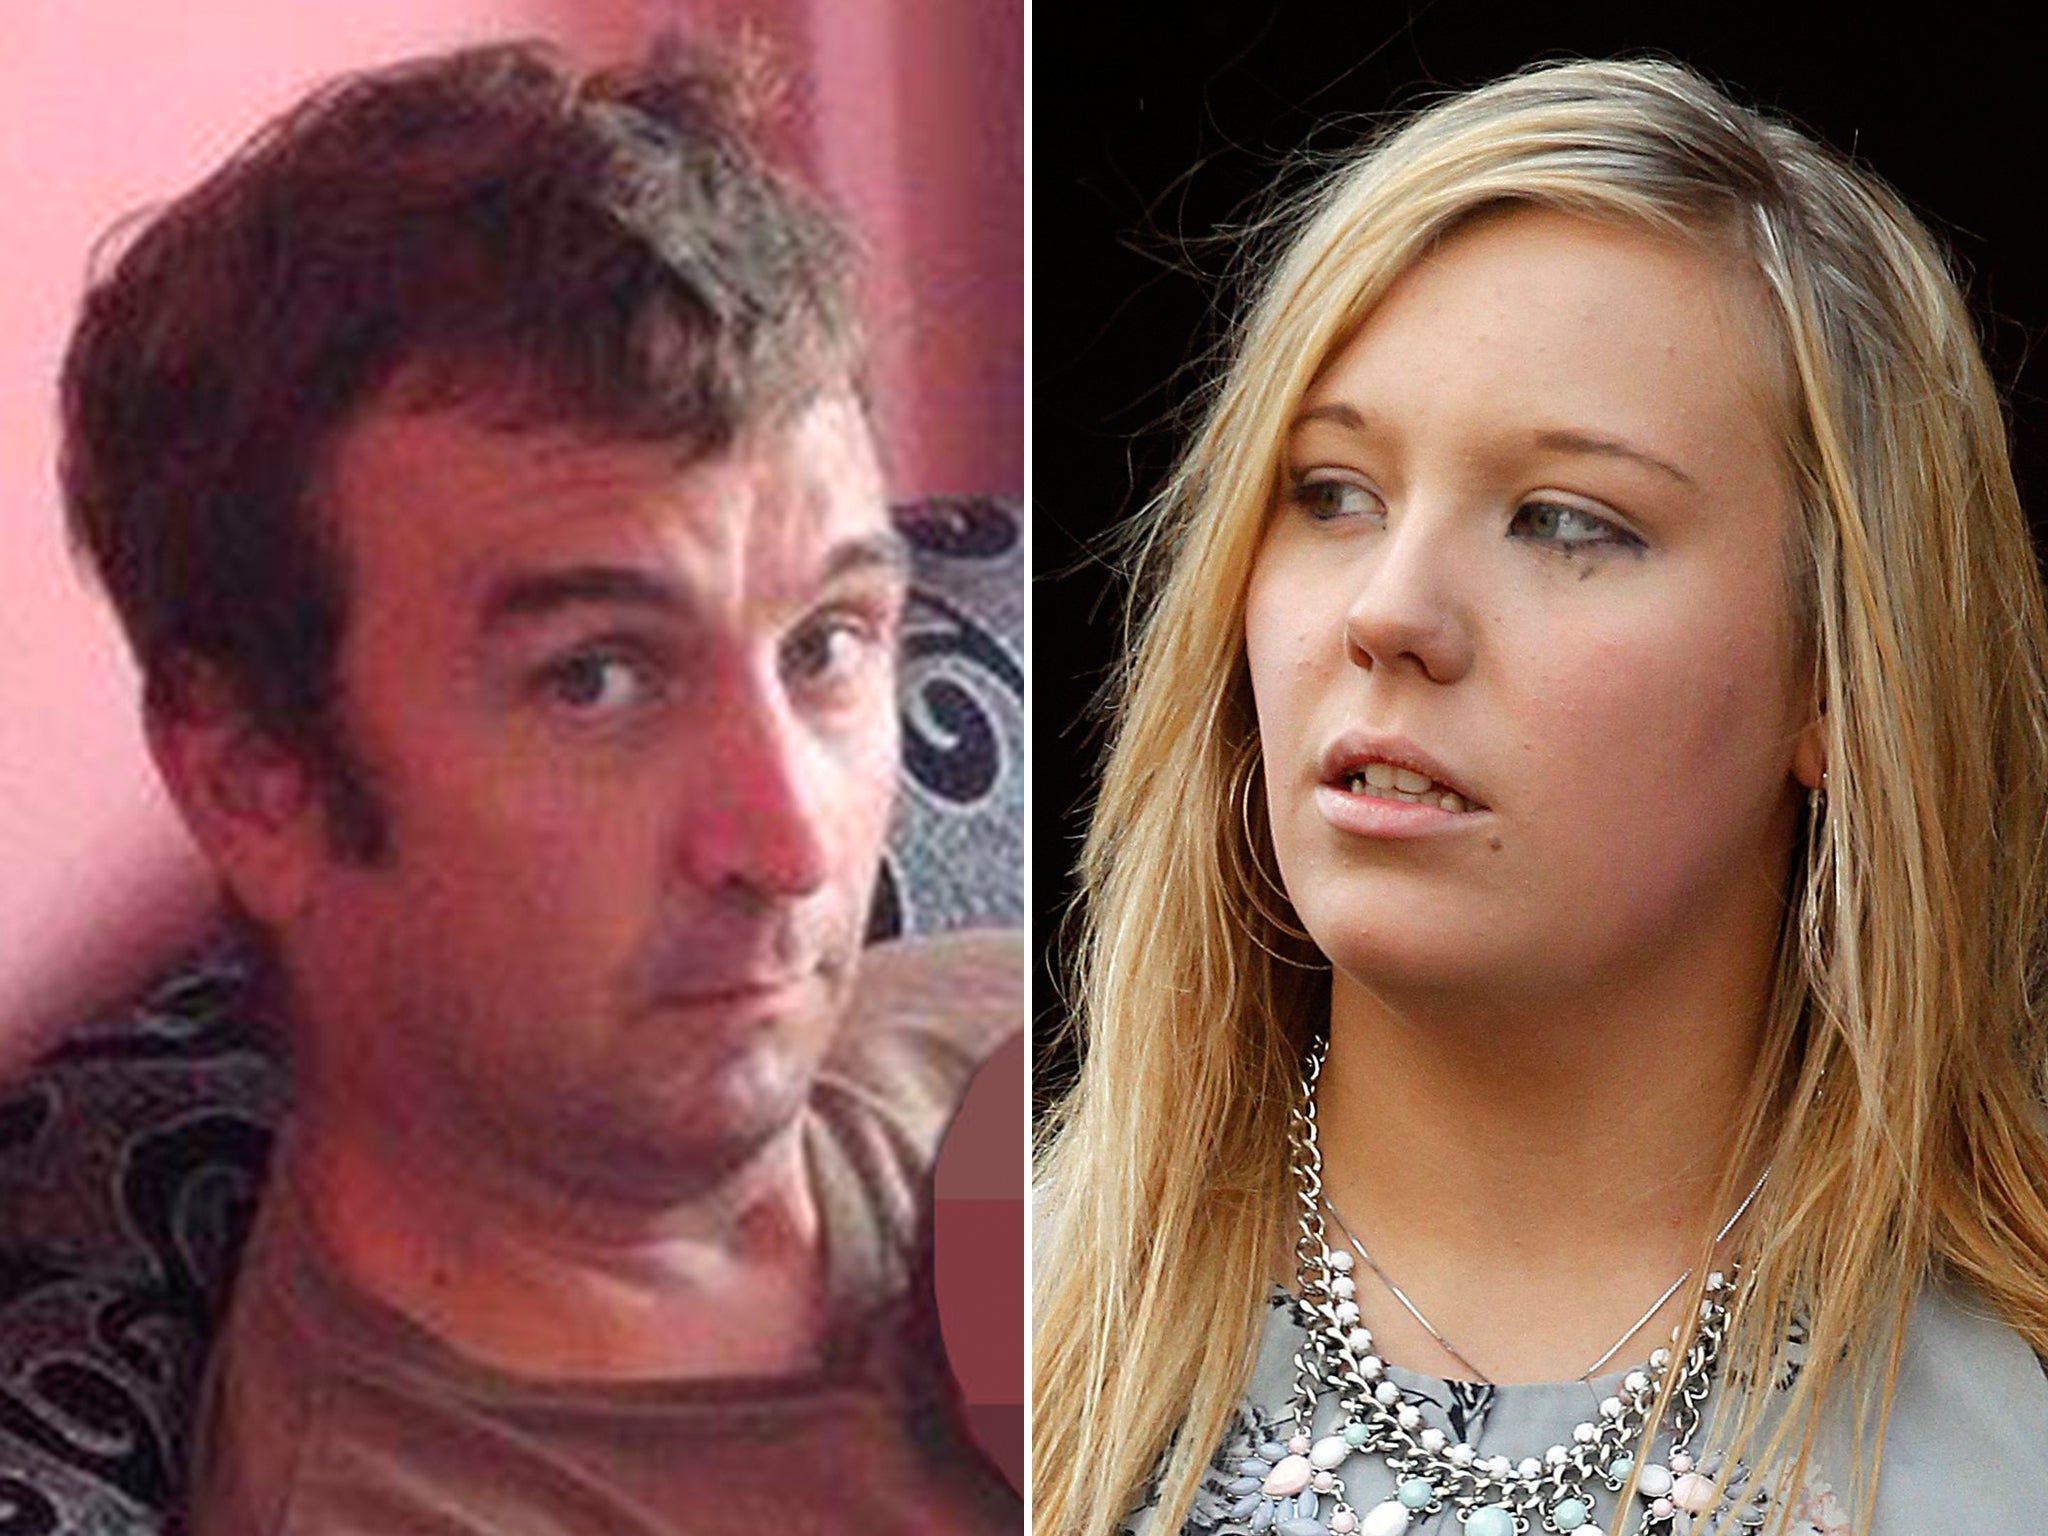 David Haines and his daughter Bethany